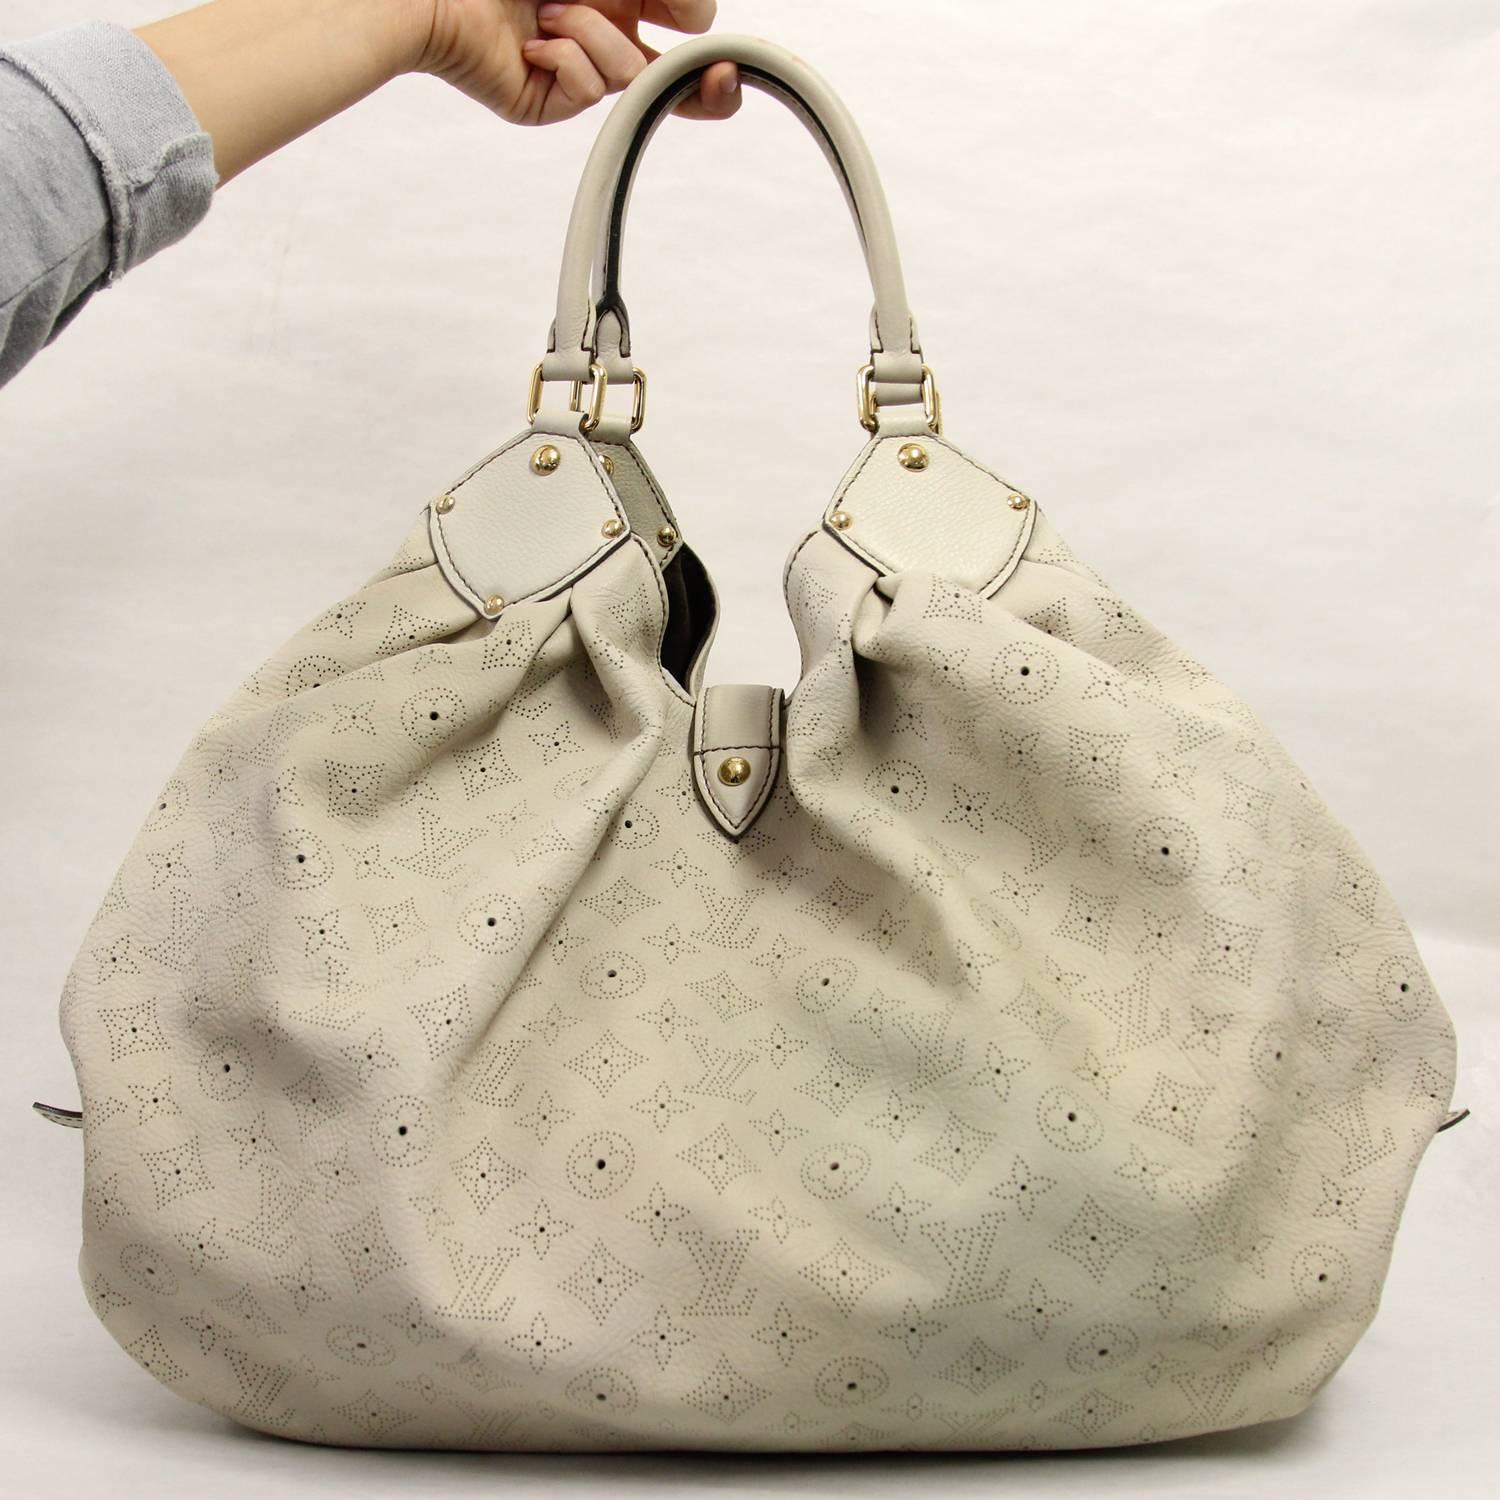 Lovely Louis Vuitton hobo bag, perforated logo leather and suede lining. One zippered pocket, two top handles, adjustable belts on both sides and gold hardware
This piece conditions are good: some minor signs of use can be observed.
Original dustbag